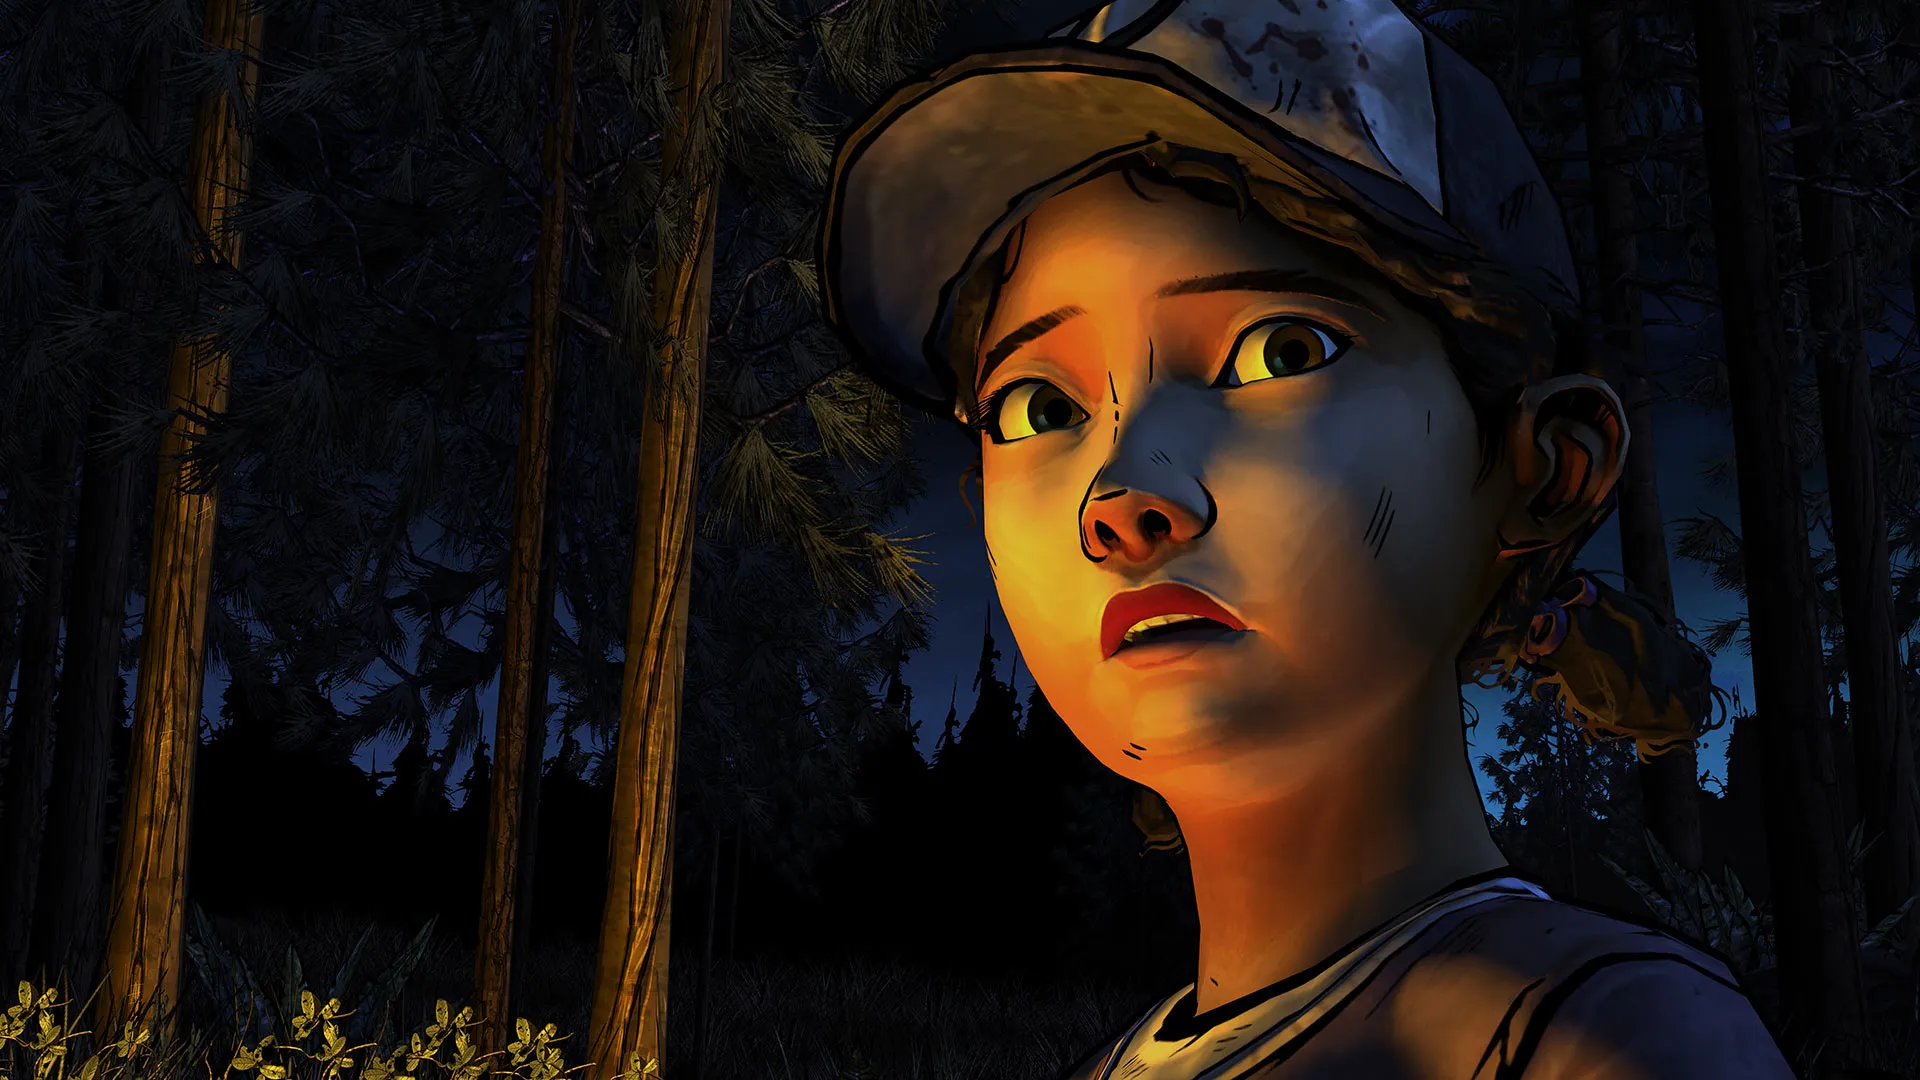 We're Getting More Clementine In The Walking Dead Game | The Mary Sue